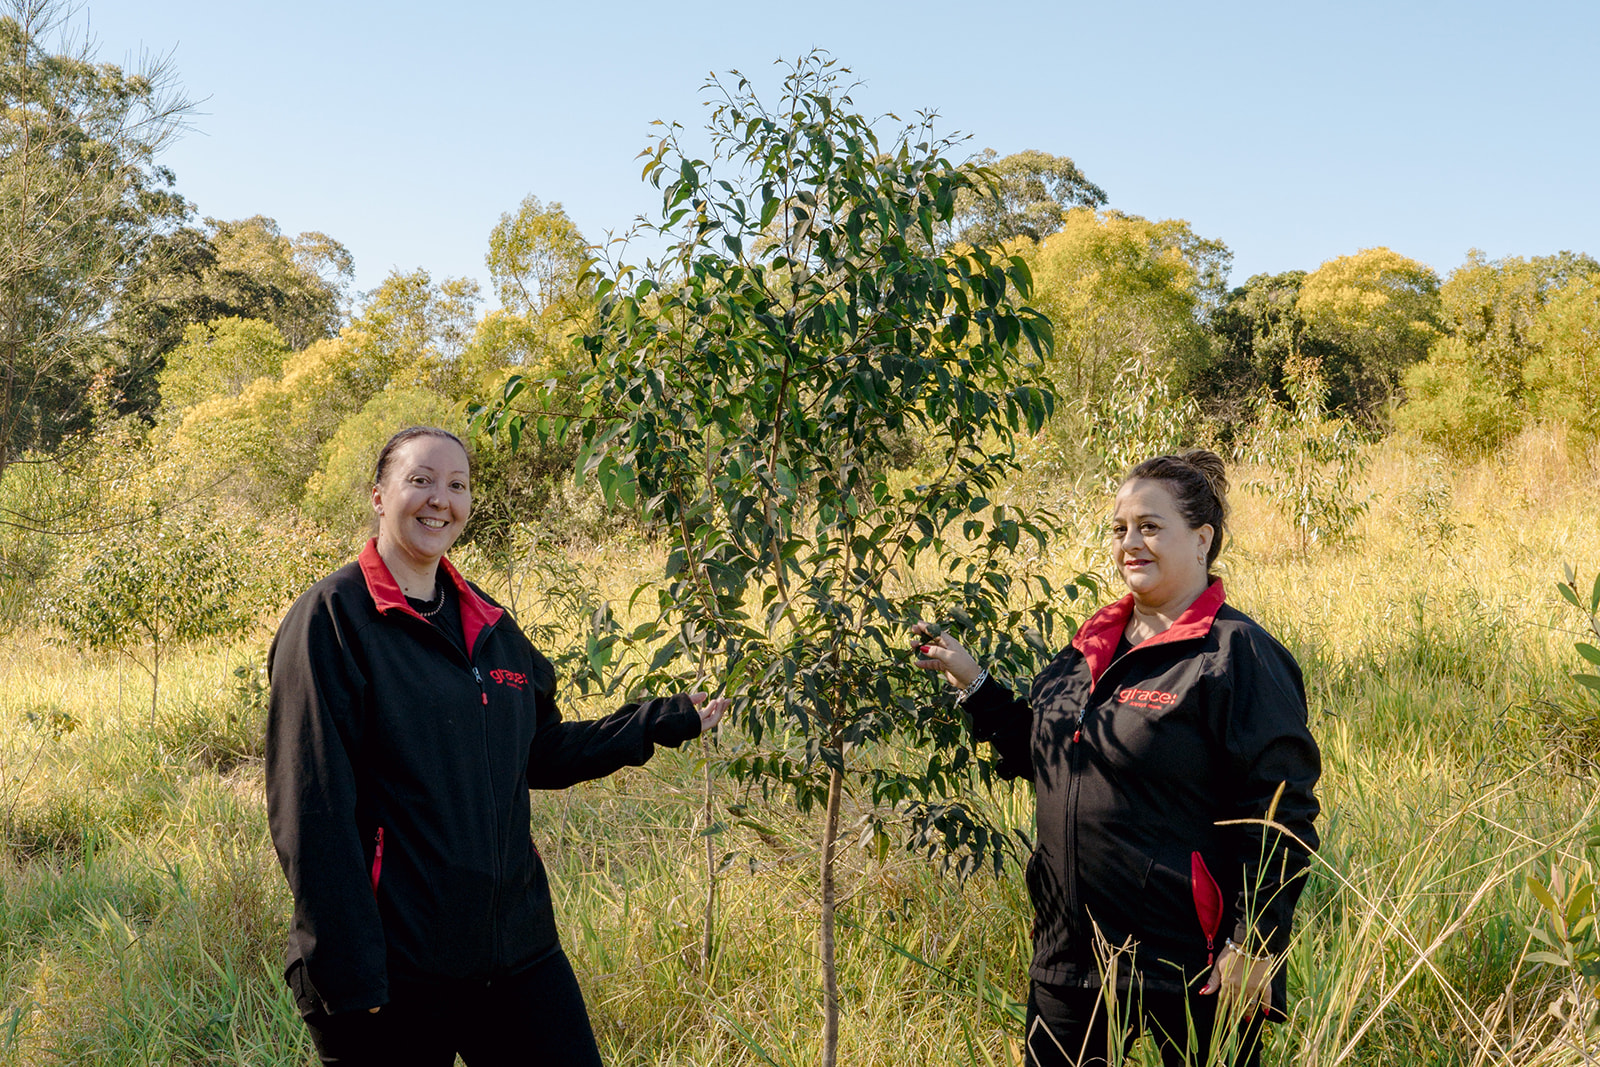 Trees for Containers: Restoring biodiverse forests and protect endangered wildlife